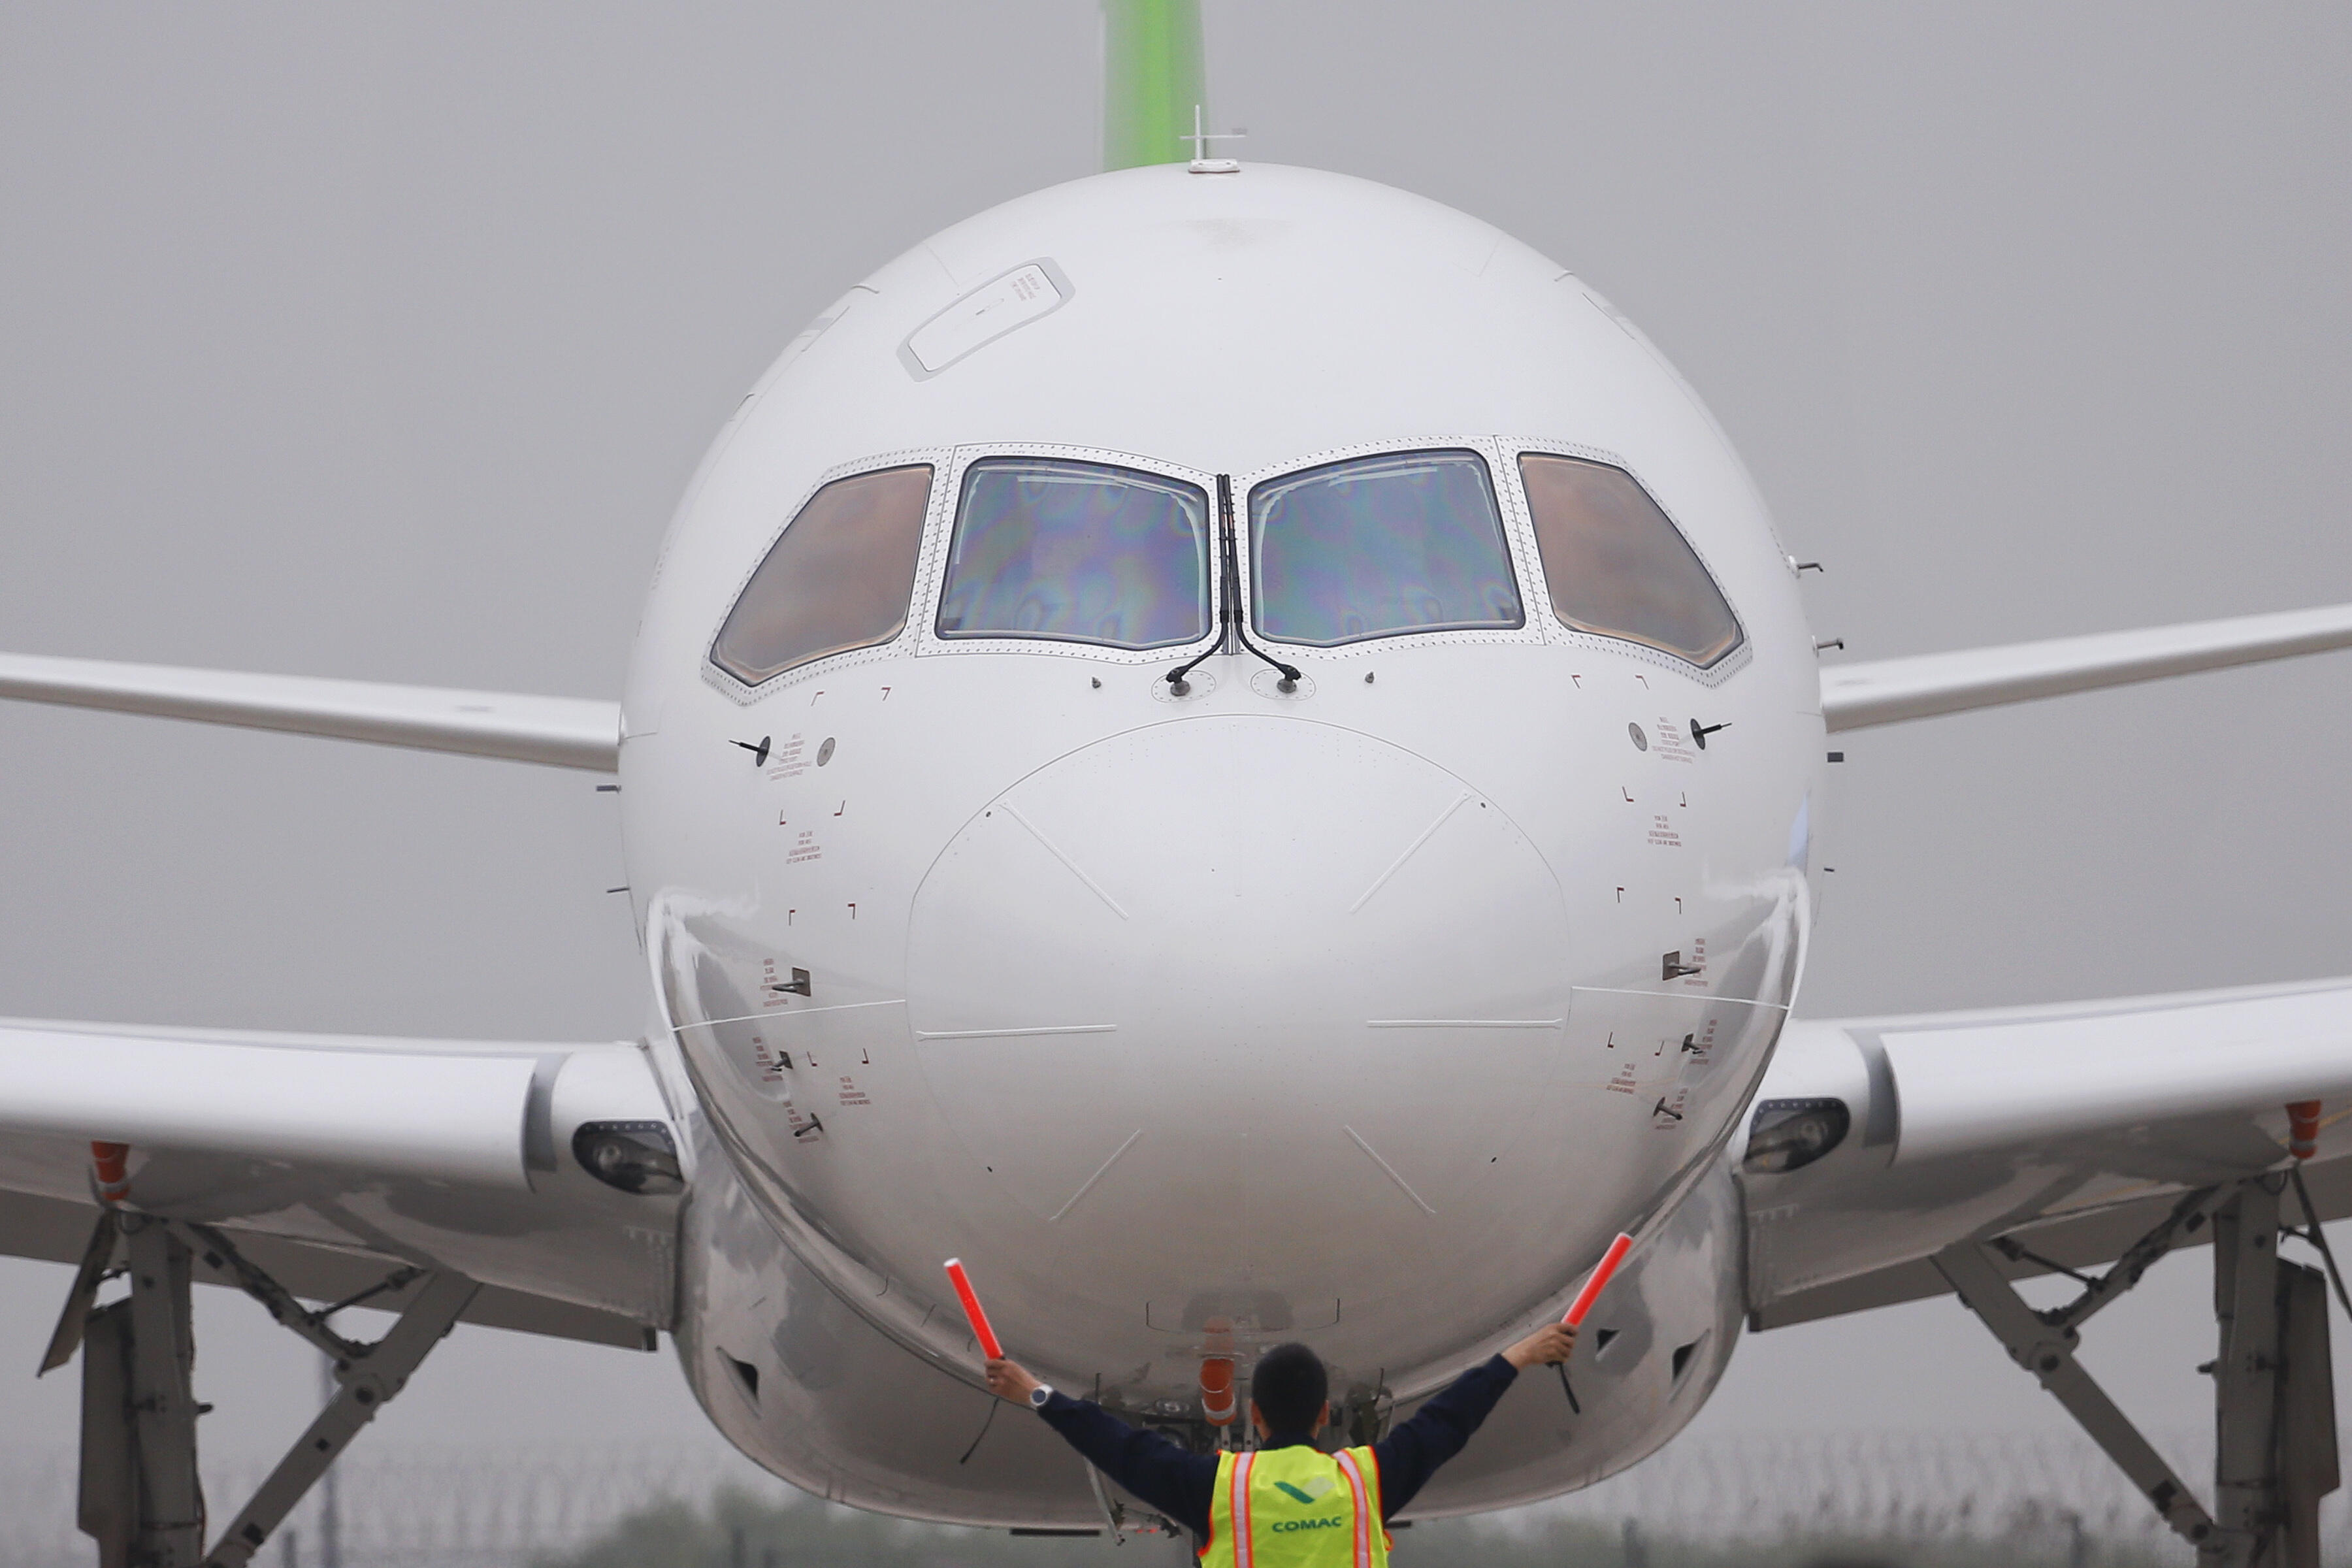 A member of staff signals in front of China's home-grown C919 passenger jet after it landed on its maiden flight at Pudong International Airport in Shanghai on May 5, 2017. The first large made-in-China passenger plane took off on its maiden test flight o